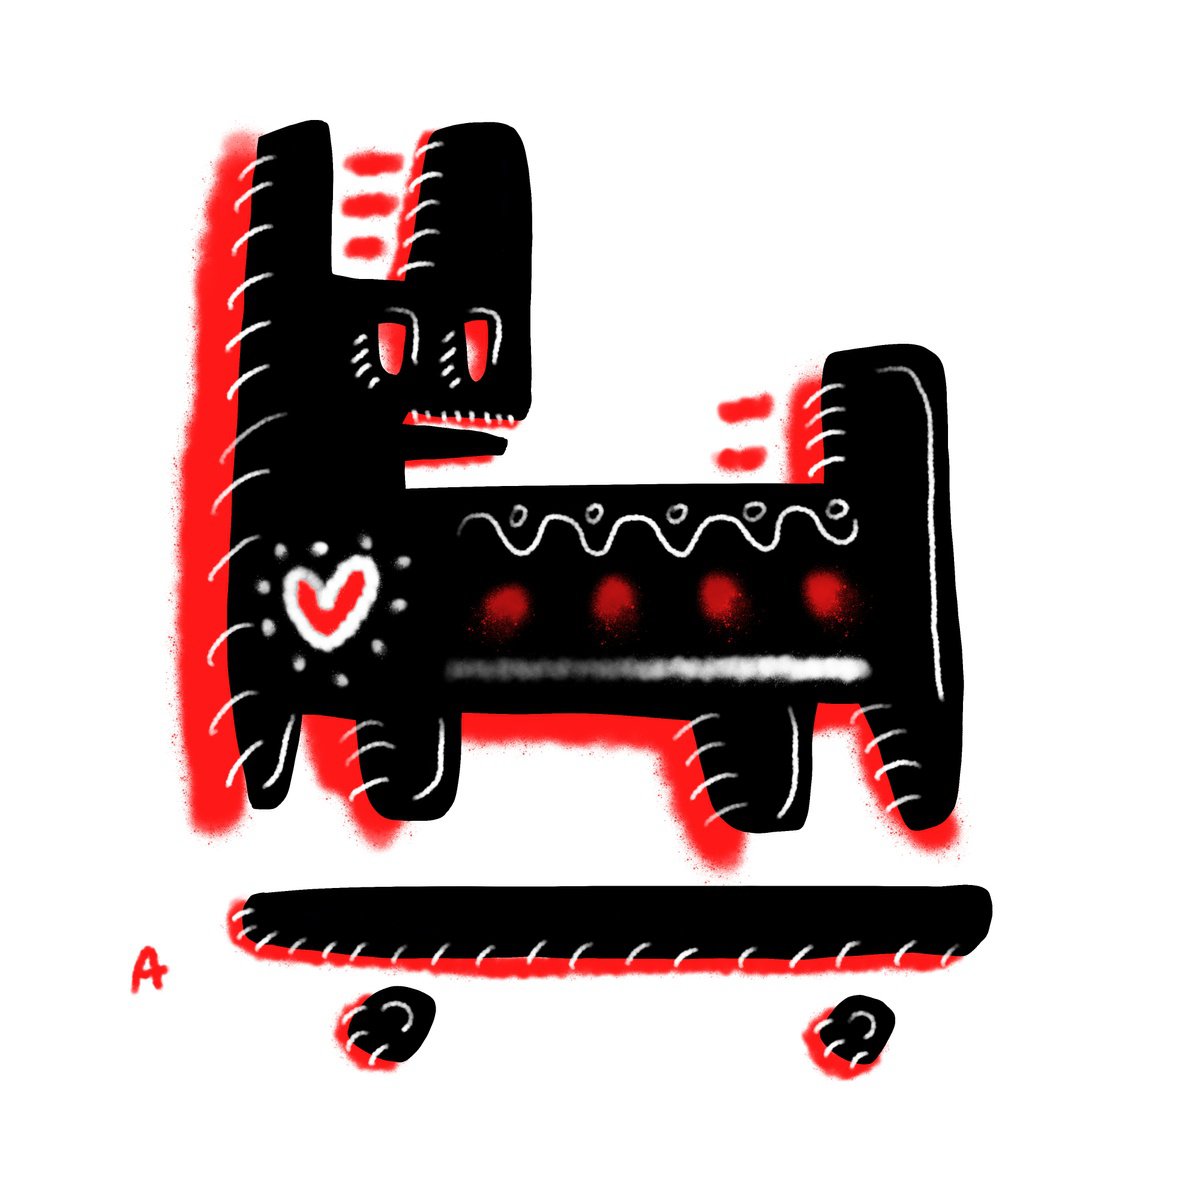 SKATER DOG (red heart collection) by ngel Rivas